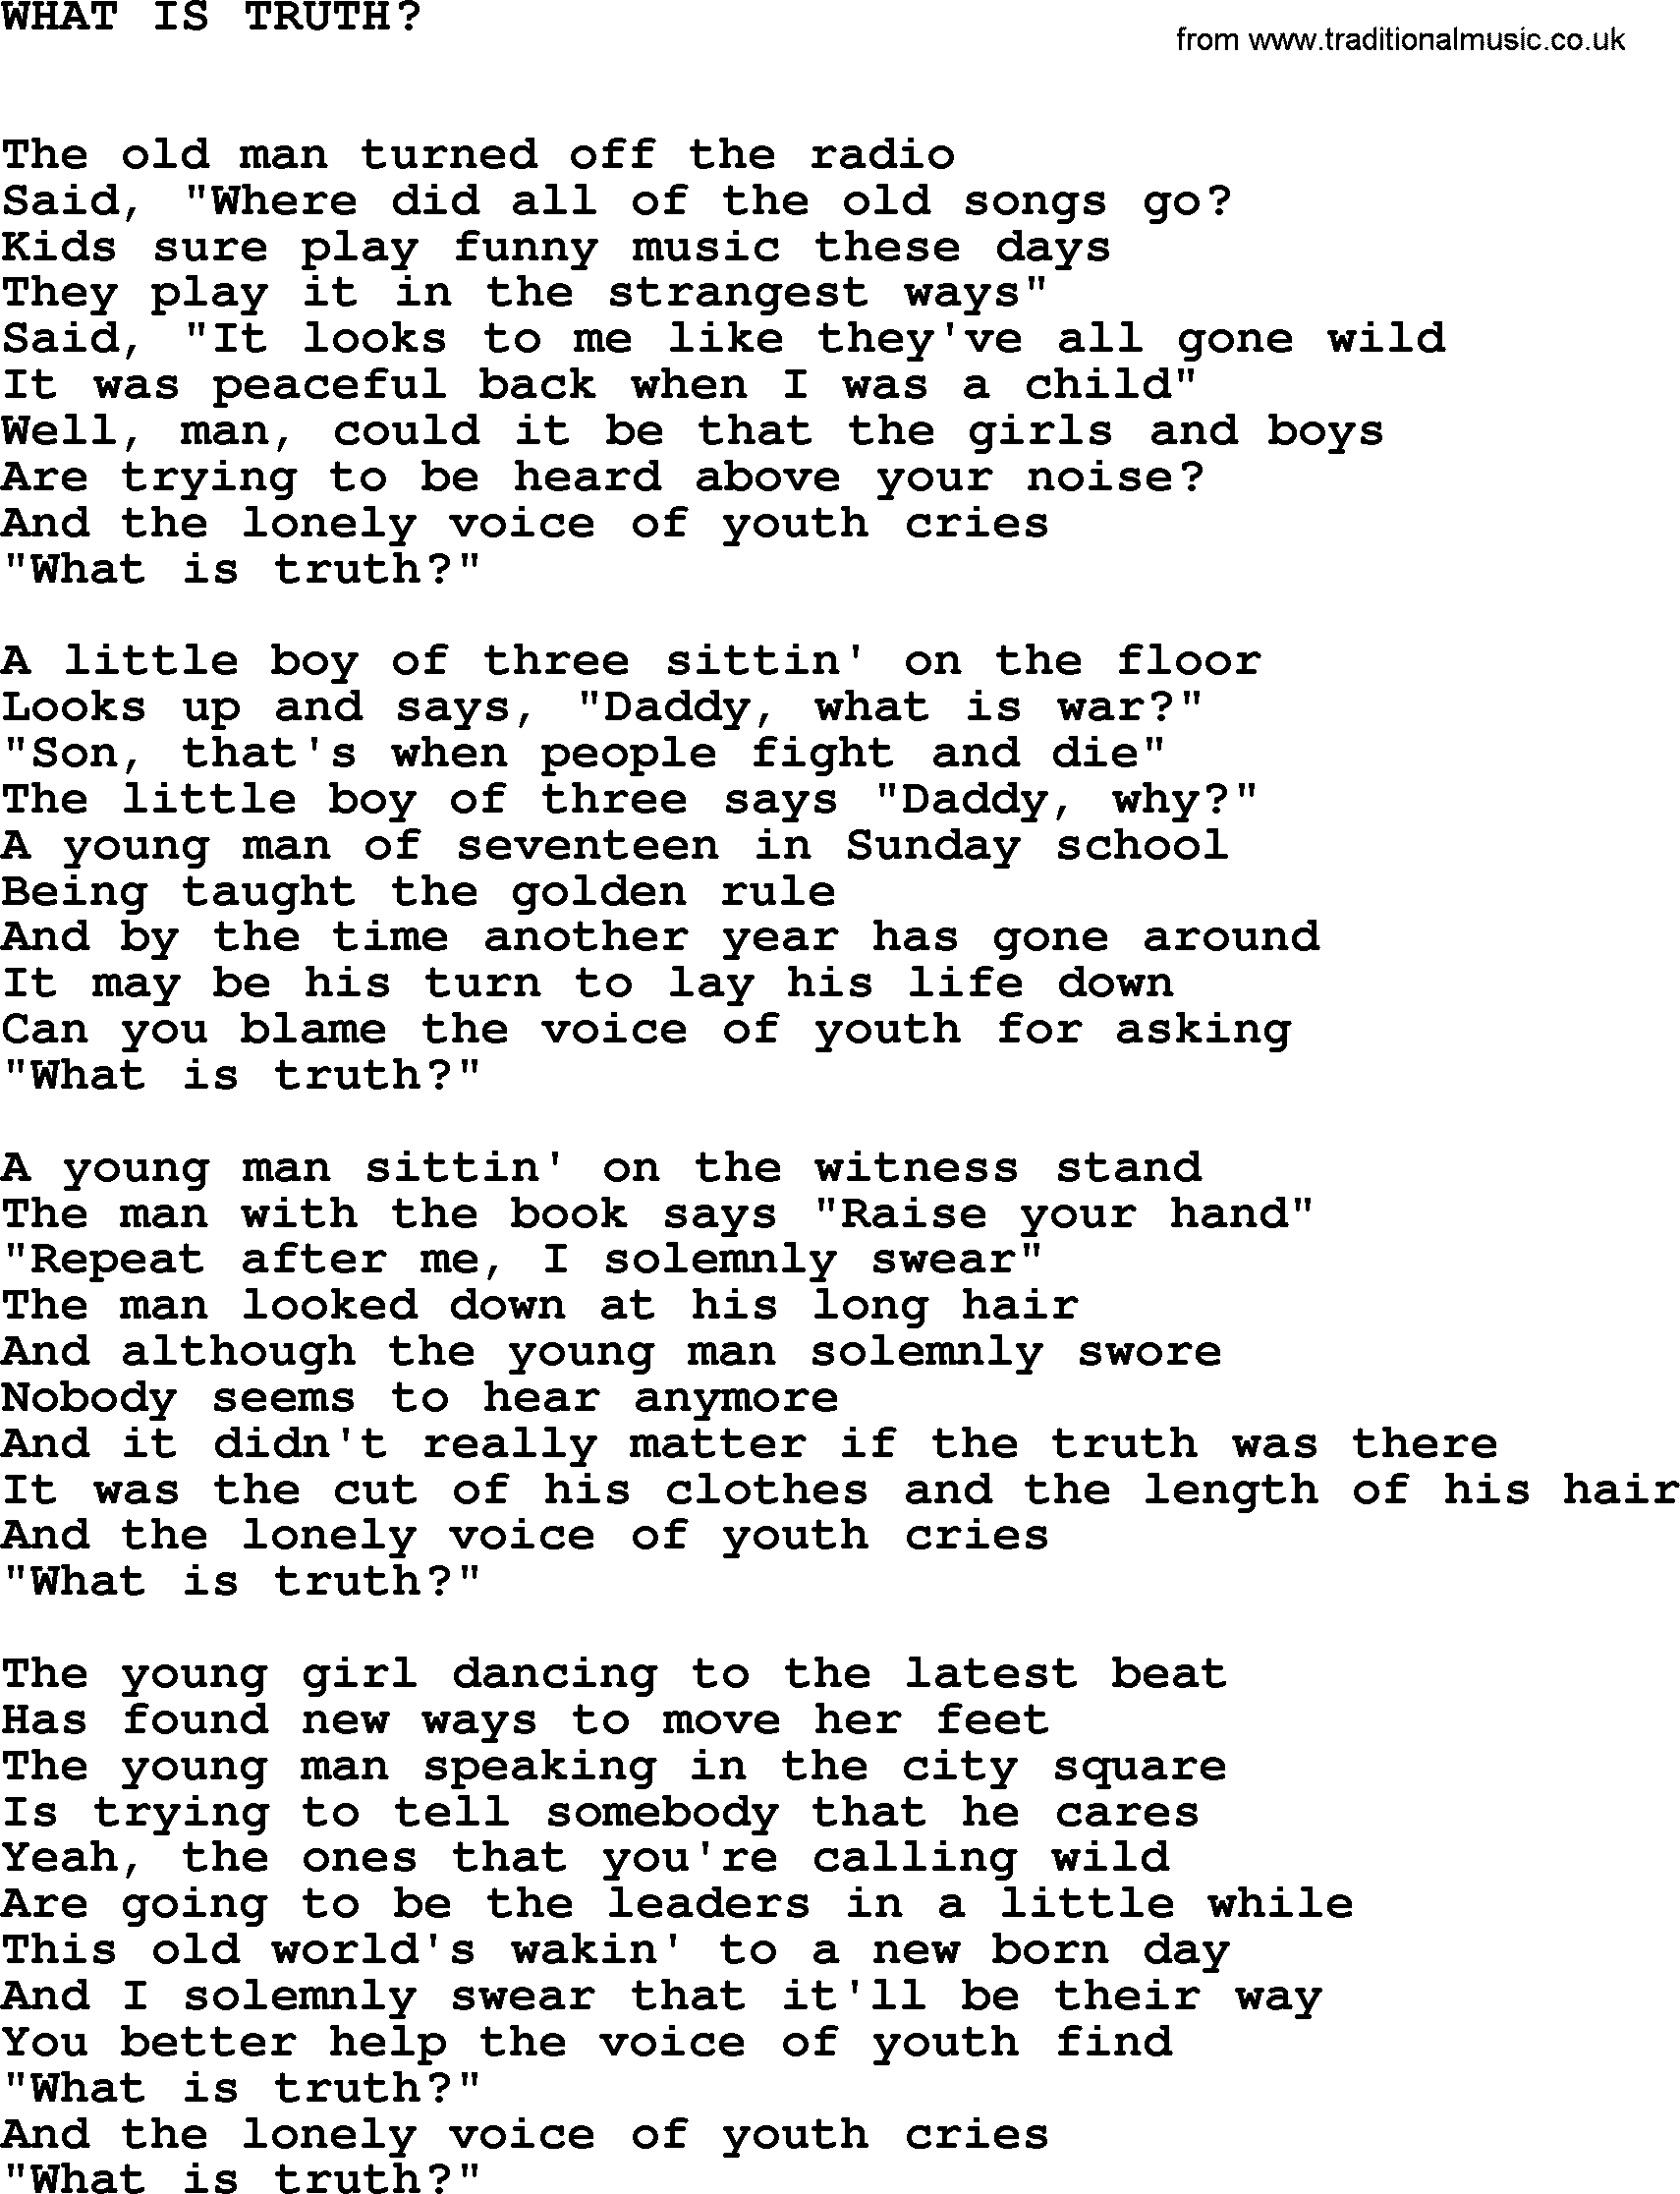 Johnny Cash song What Is Truth_.txt lyrics